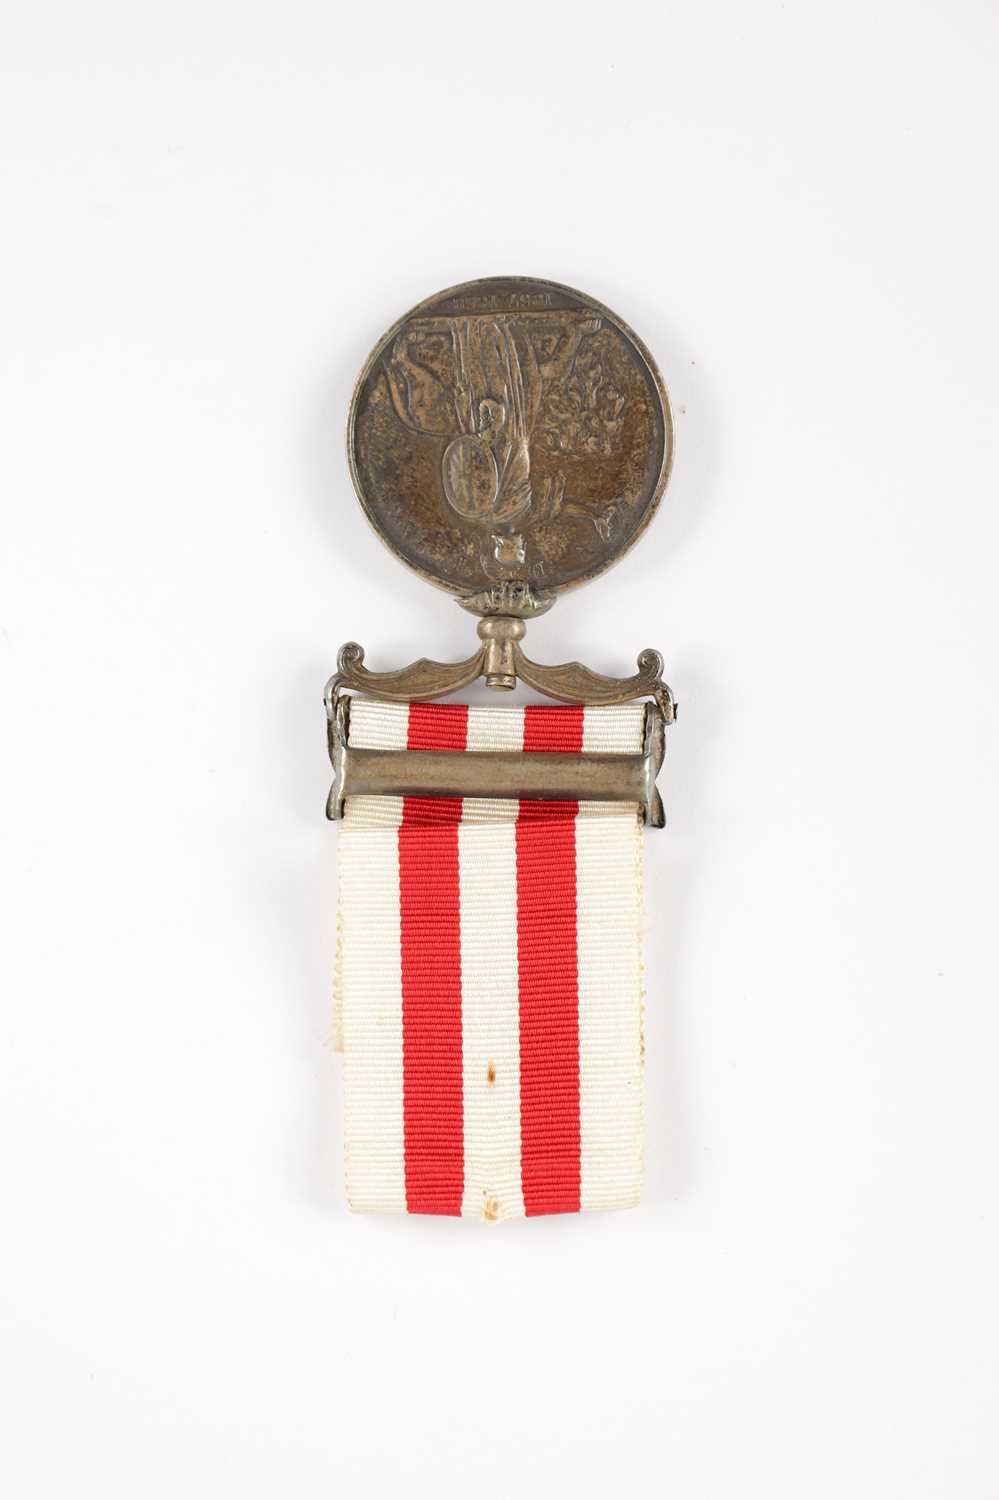 INDIAN MUTINY MEDAL 1857-59 WITH ONE CLASP - Image 3 of 5